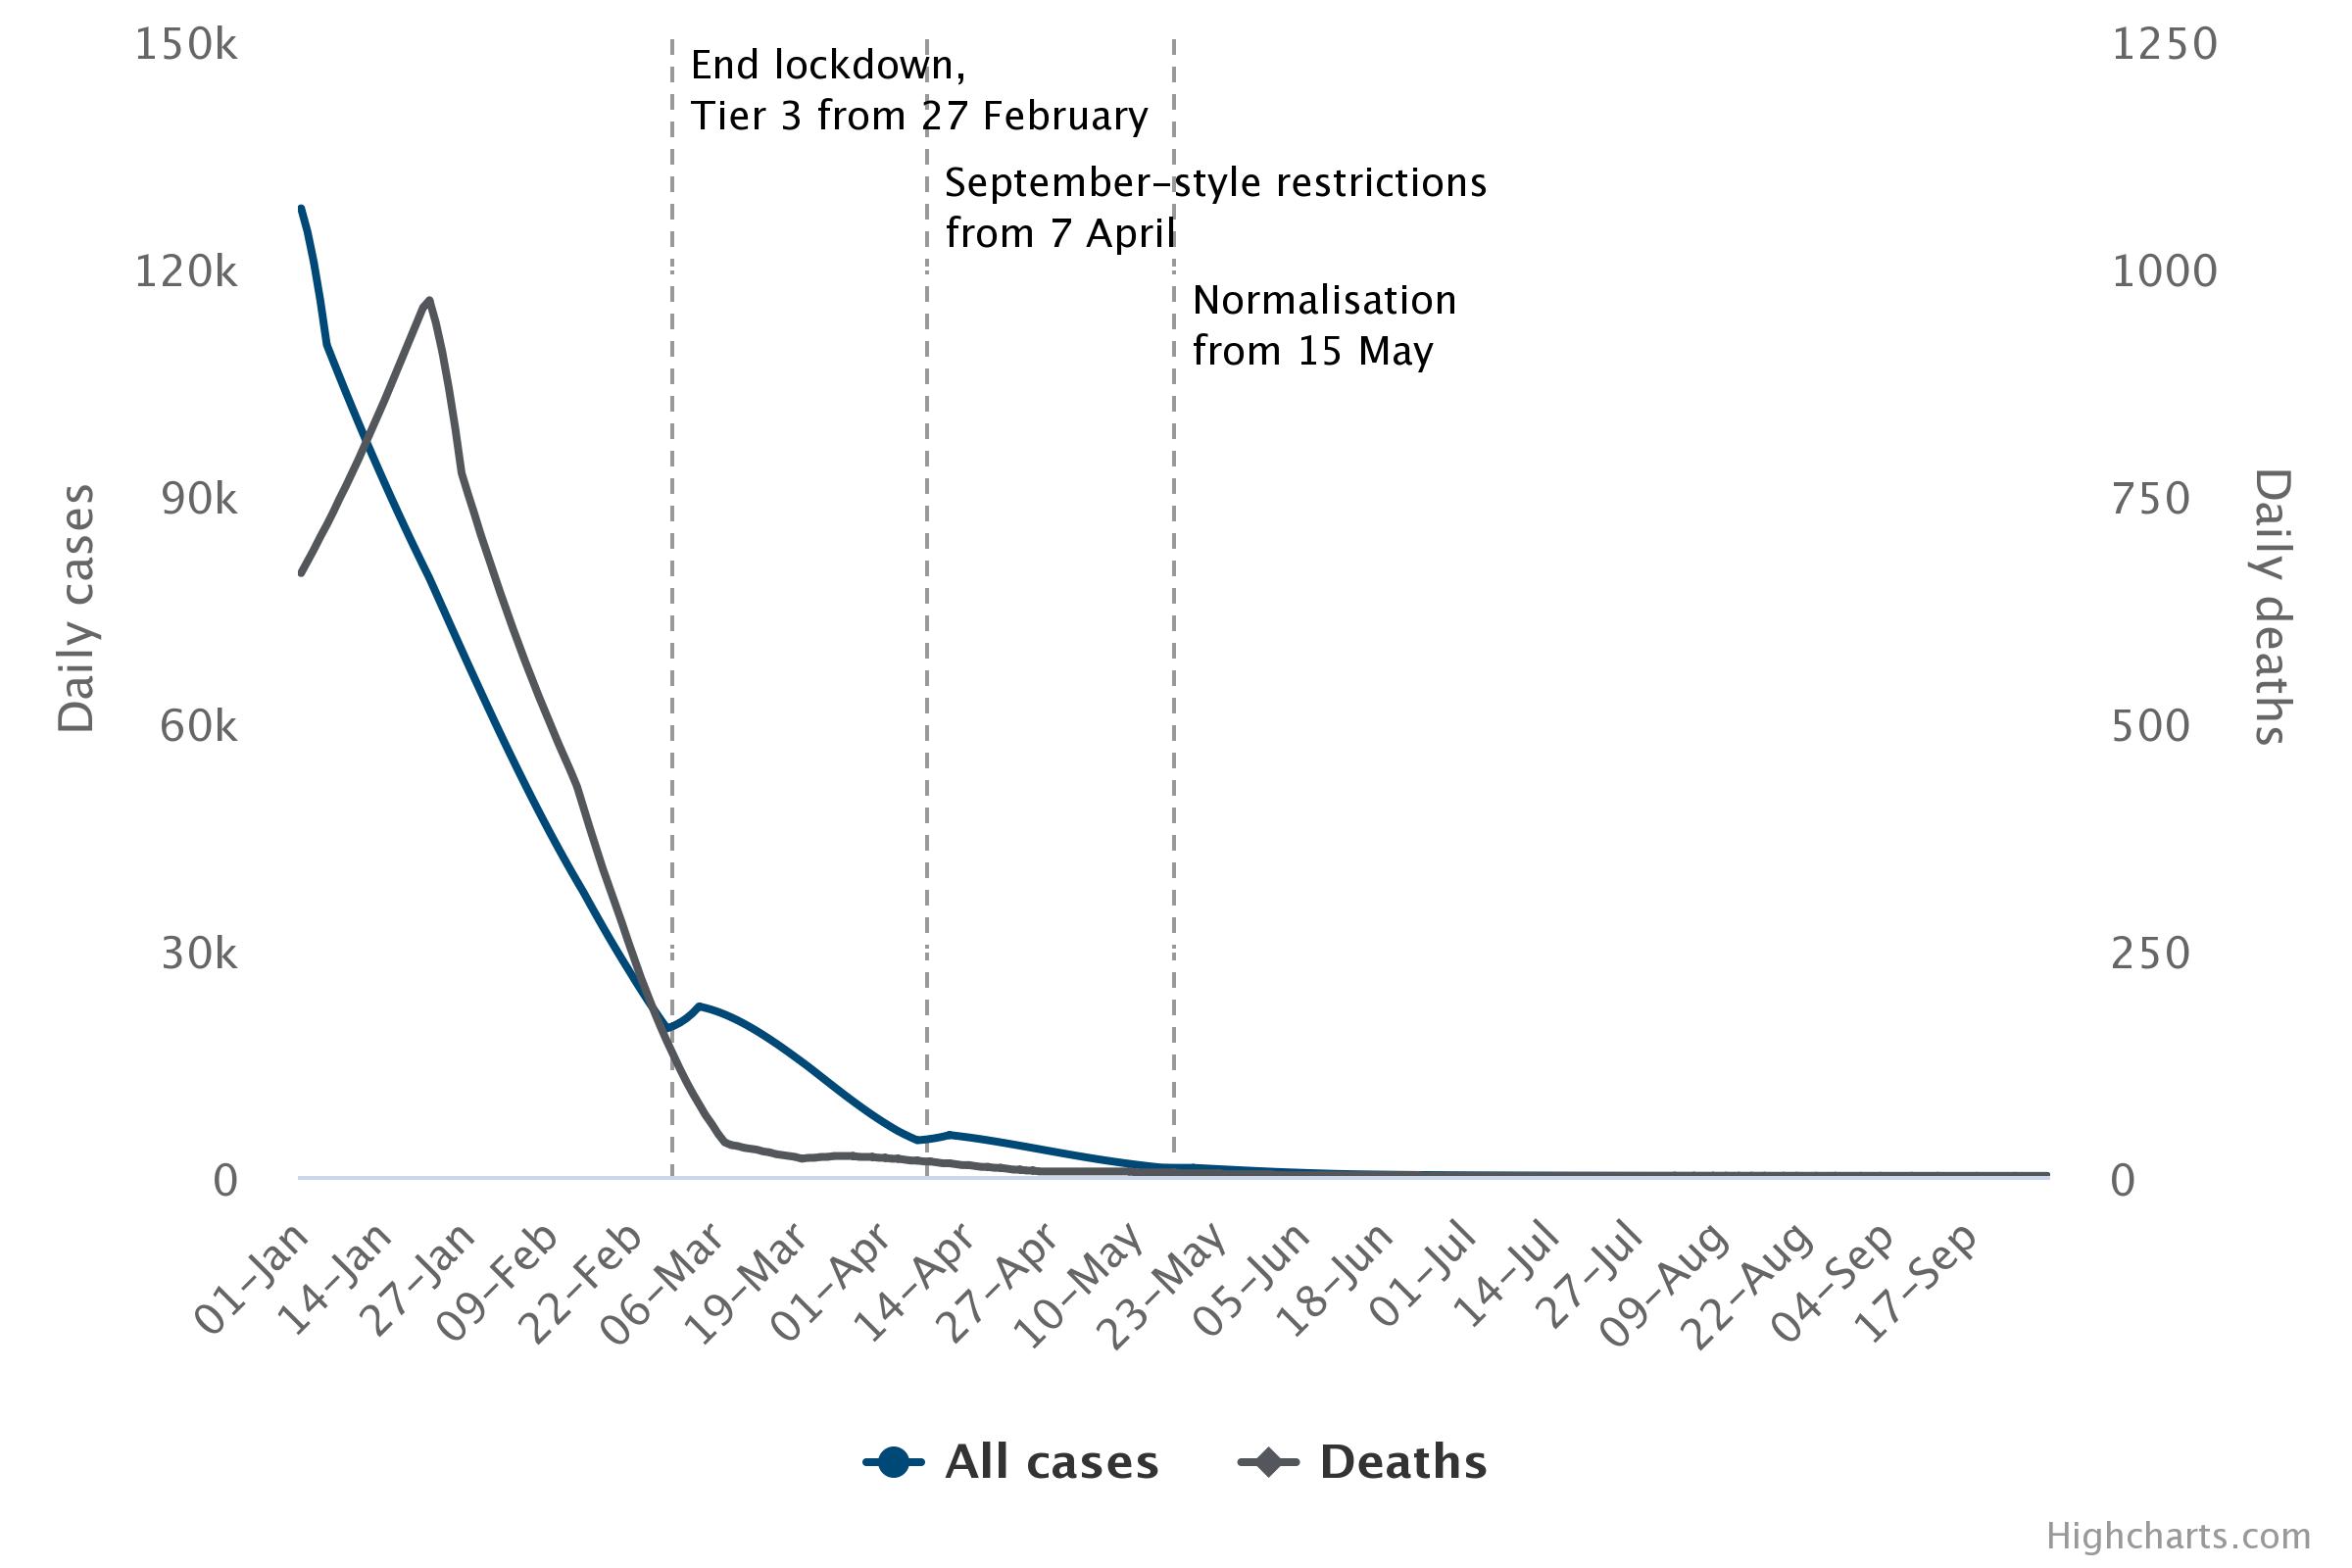 UK cases and deaths based on accelerated rollout